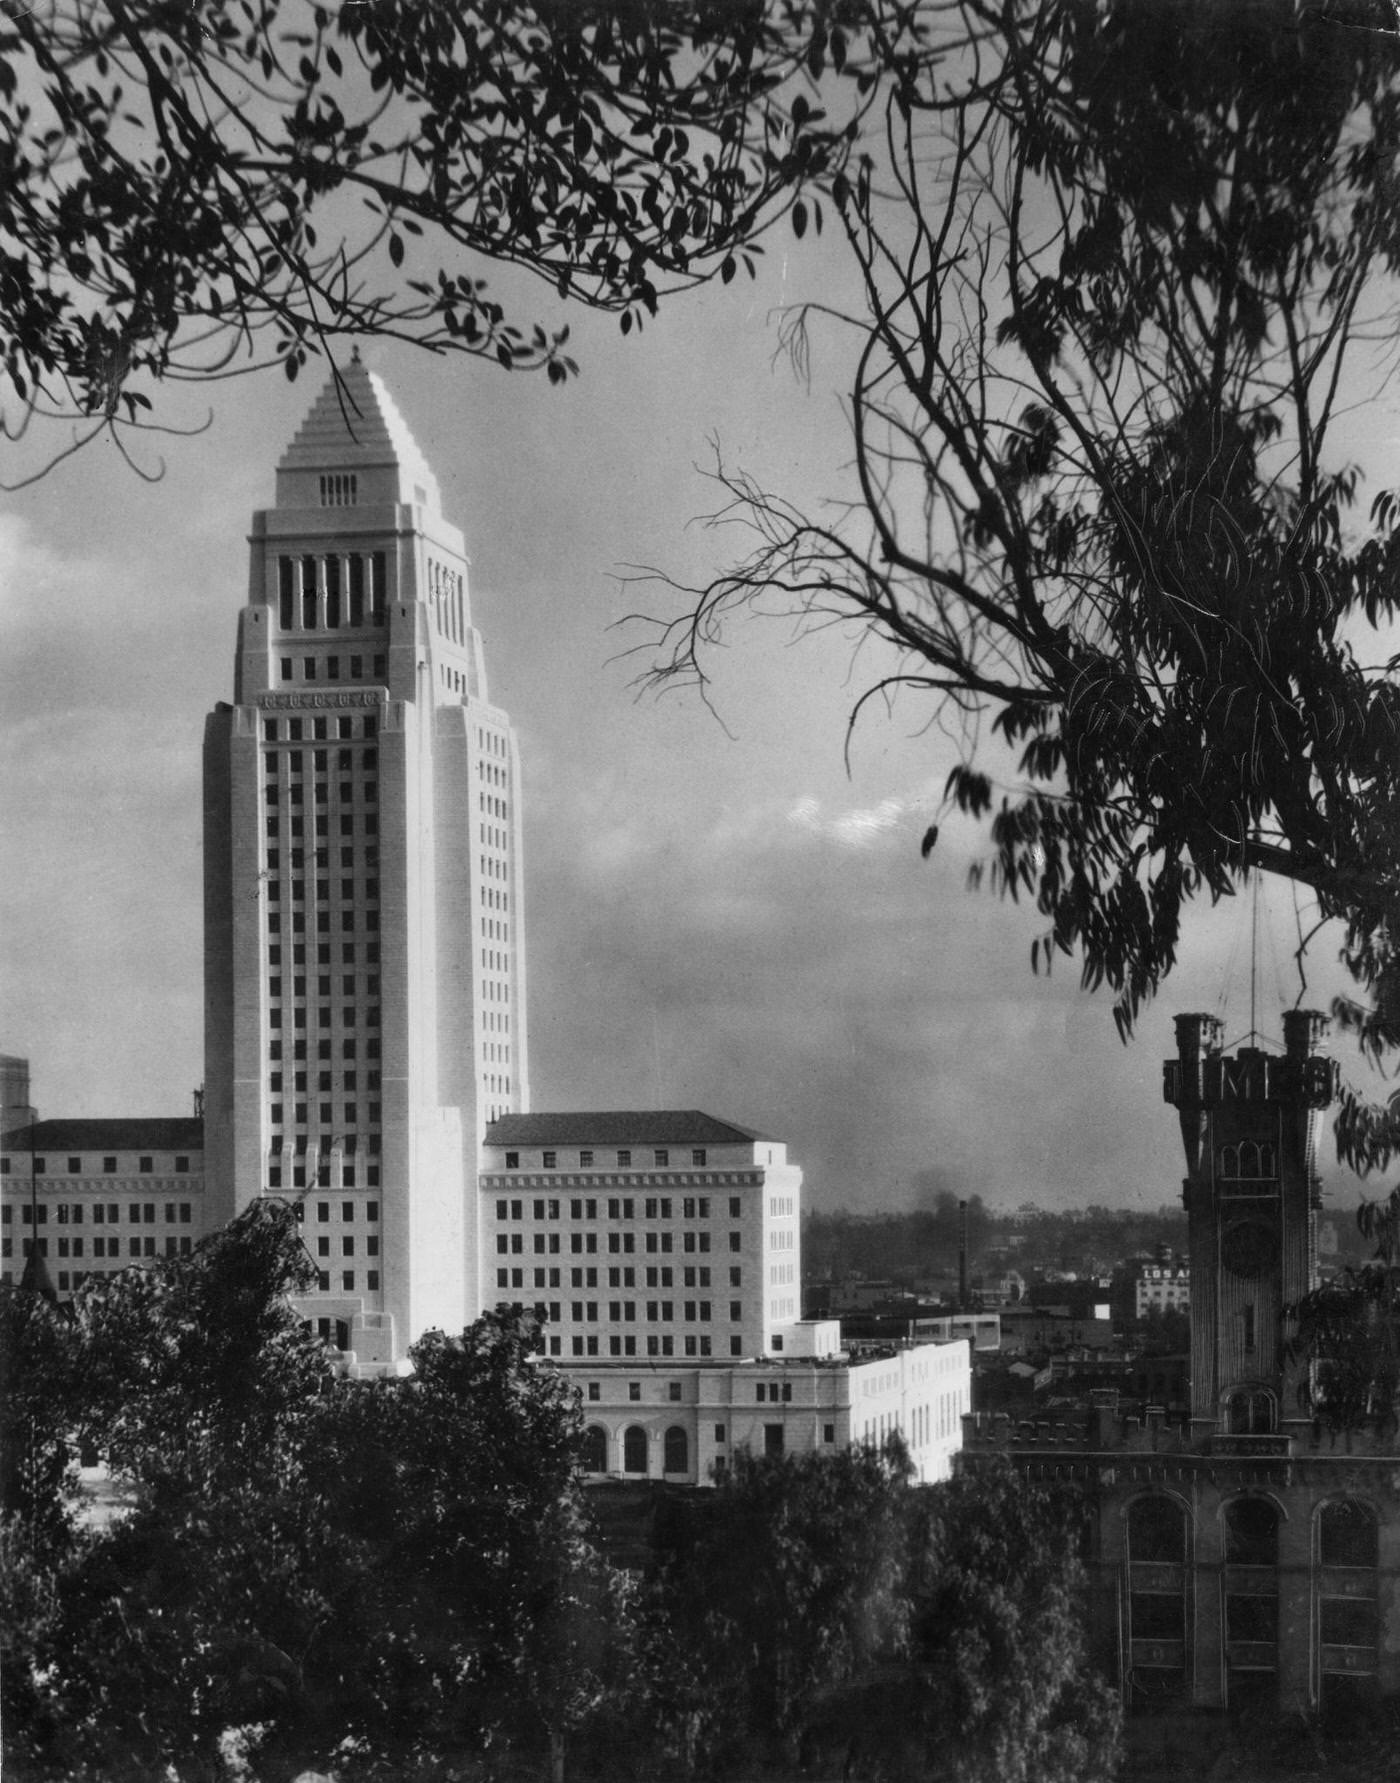 Los Angeles City Hall, Los Angeles, California, with the third Los Angeles Times Building on the right, 1930